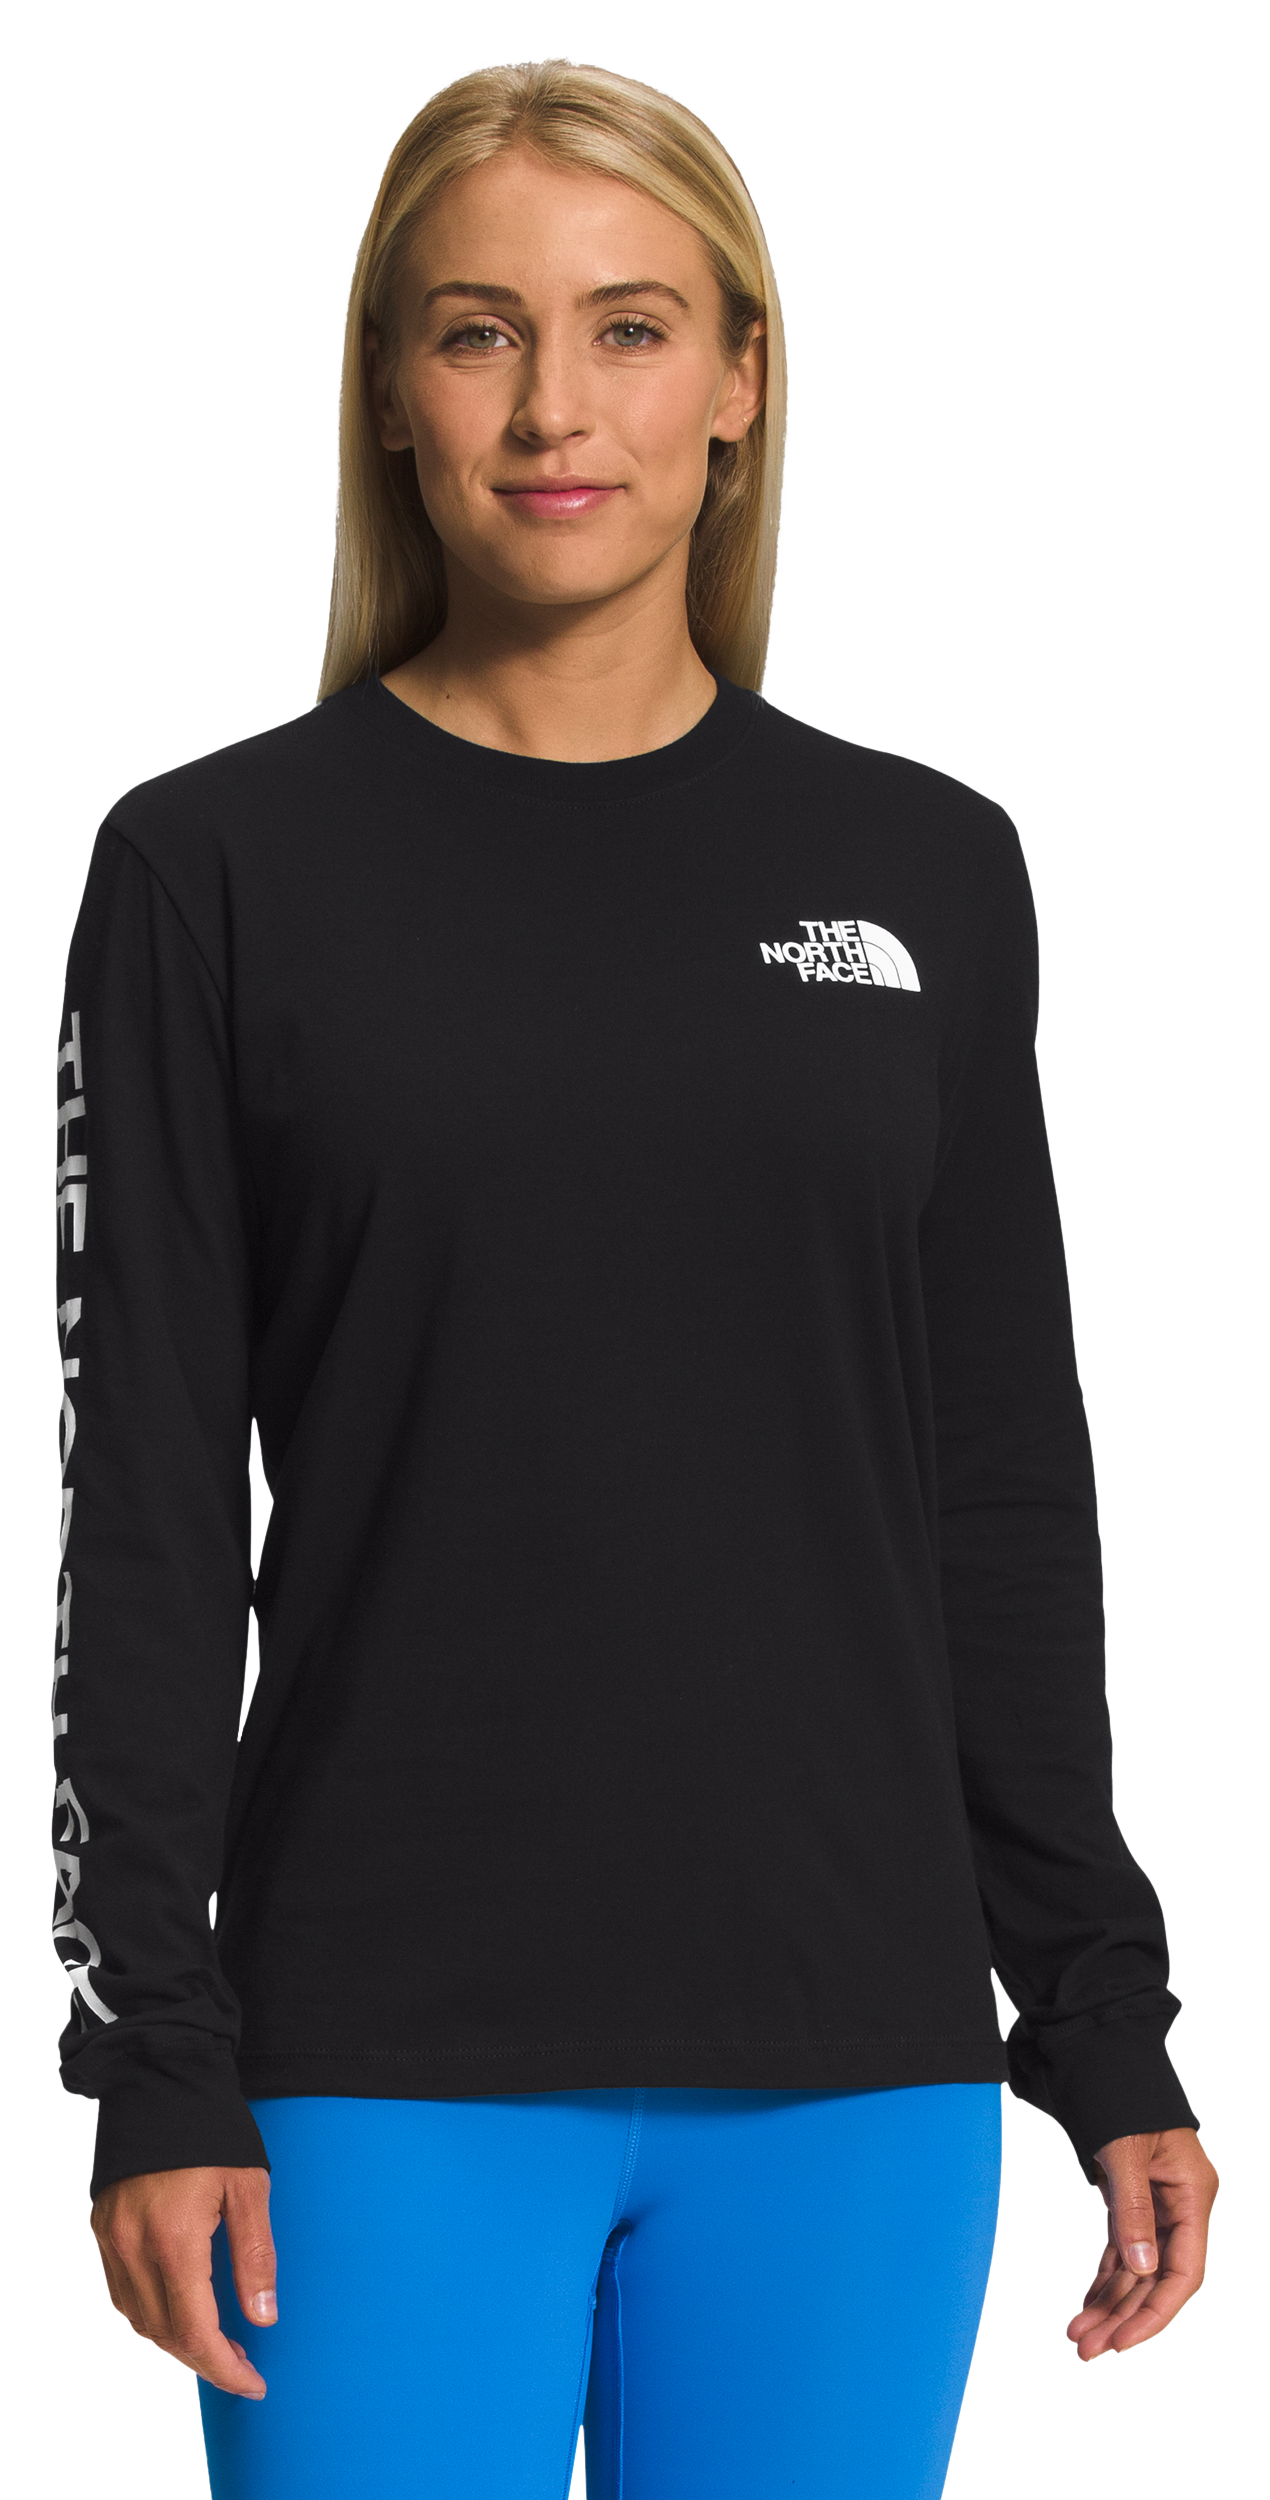 The North Face Hit Graphic Long-Sleeve T-Shirt for Ladies - TNF Black/TNF White - M